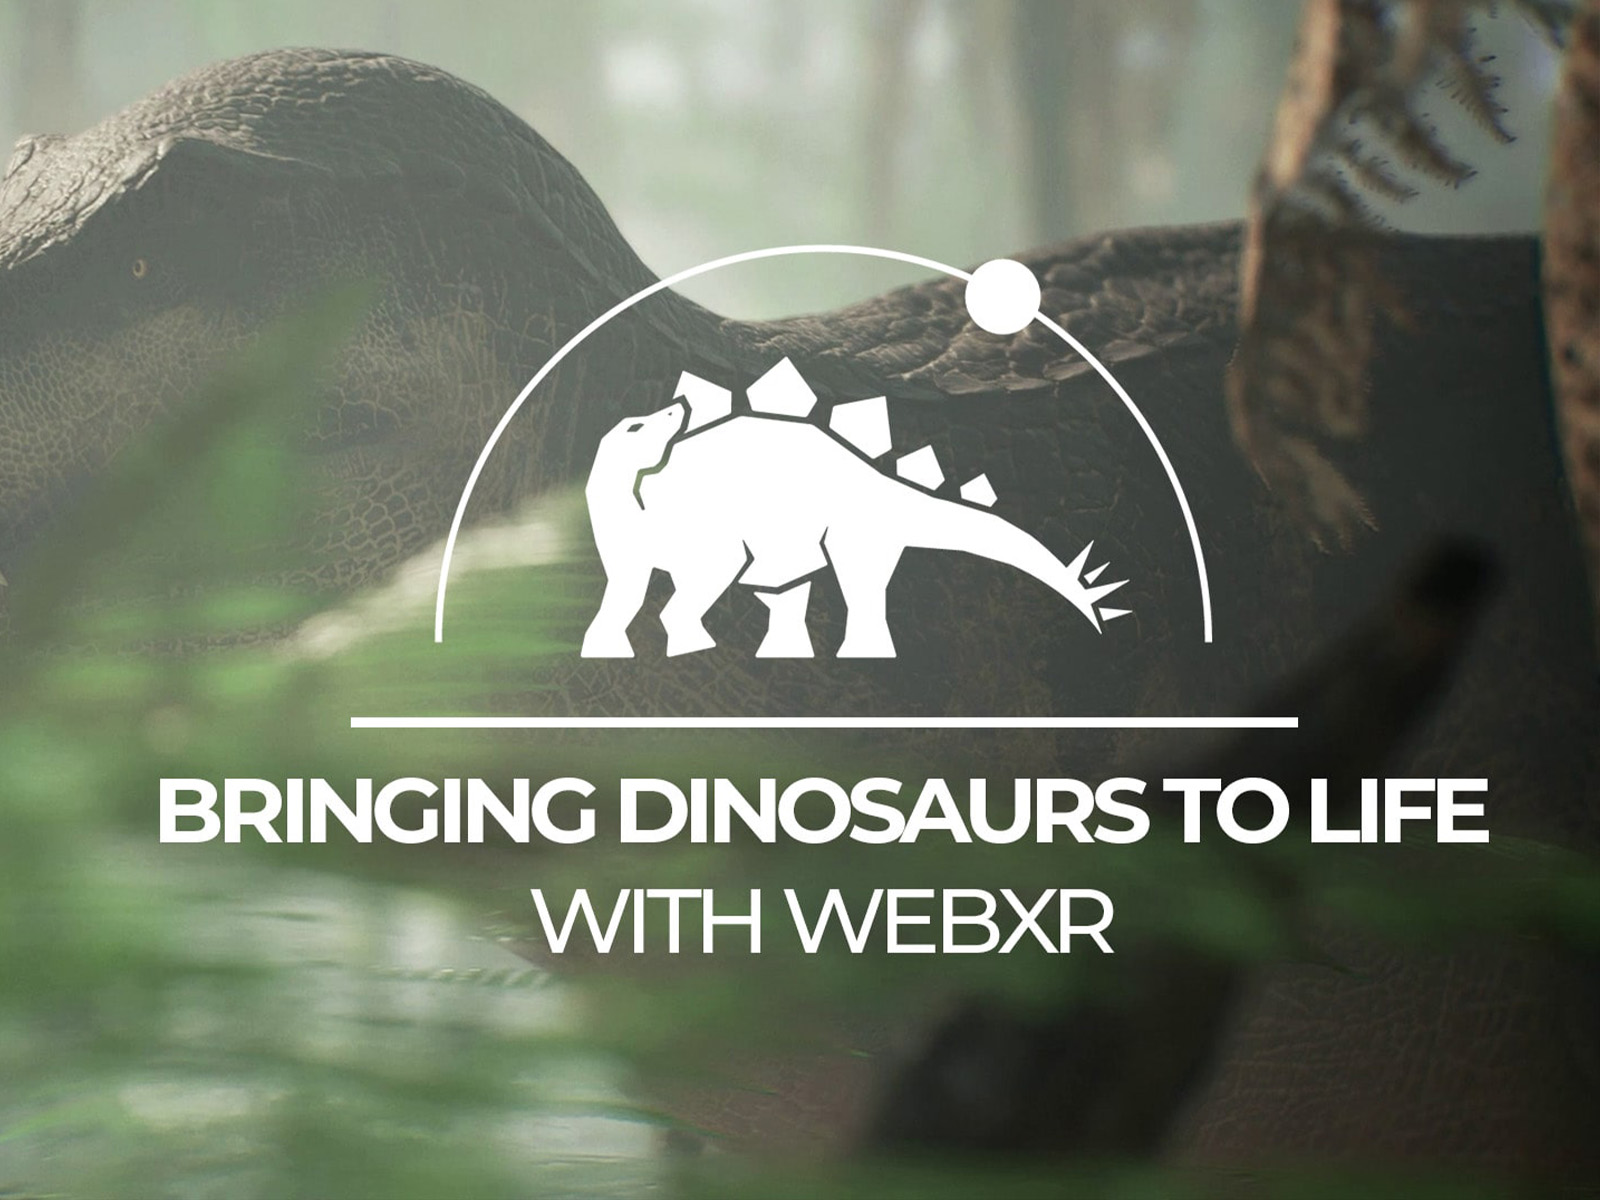 Bringing dinosaurs to life with WebXR